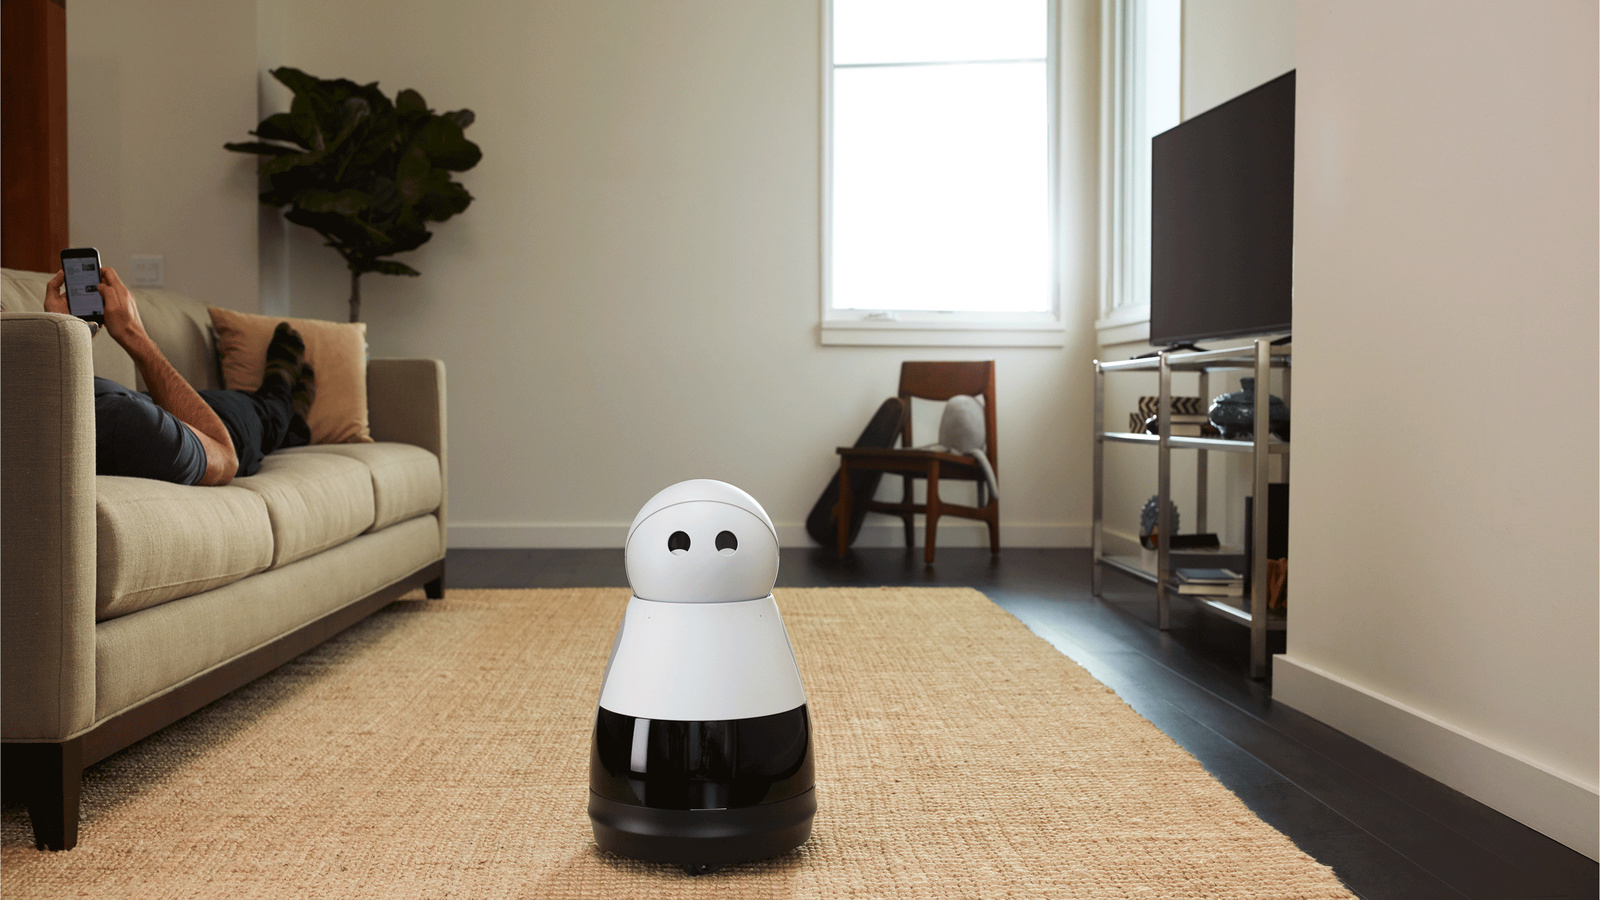 Home robot Kuri supports people in their everyday life.